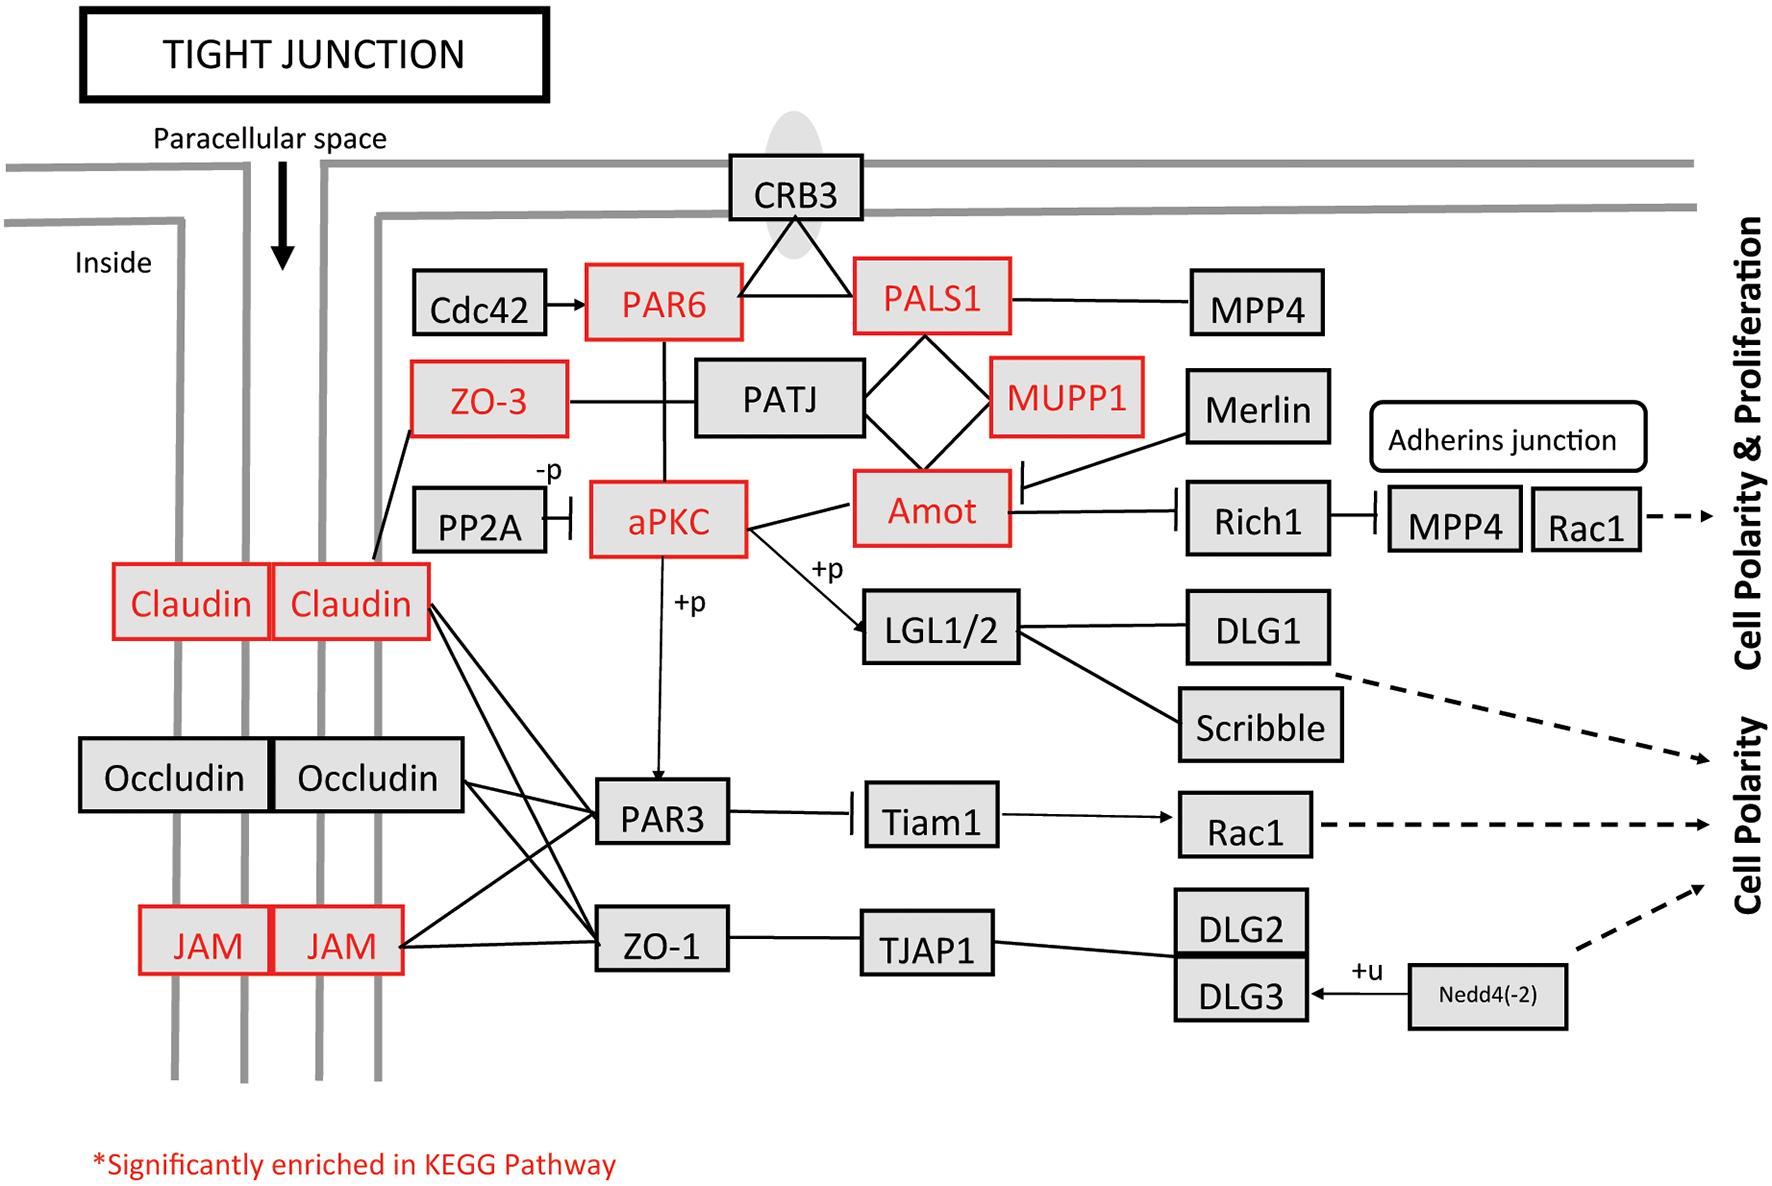 Pathway identified by gene set enrichment analysis and Kyoto Encyclopedia of Genes and Genomes pathway analysis.